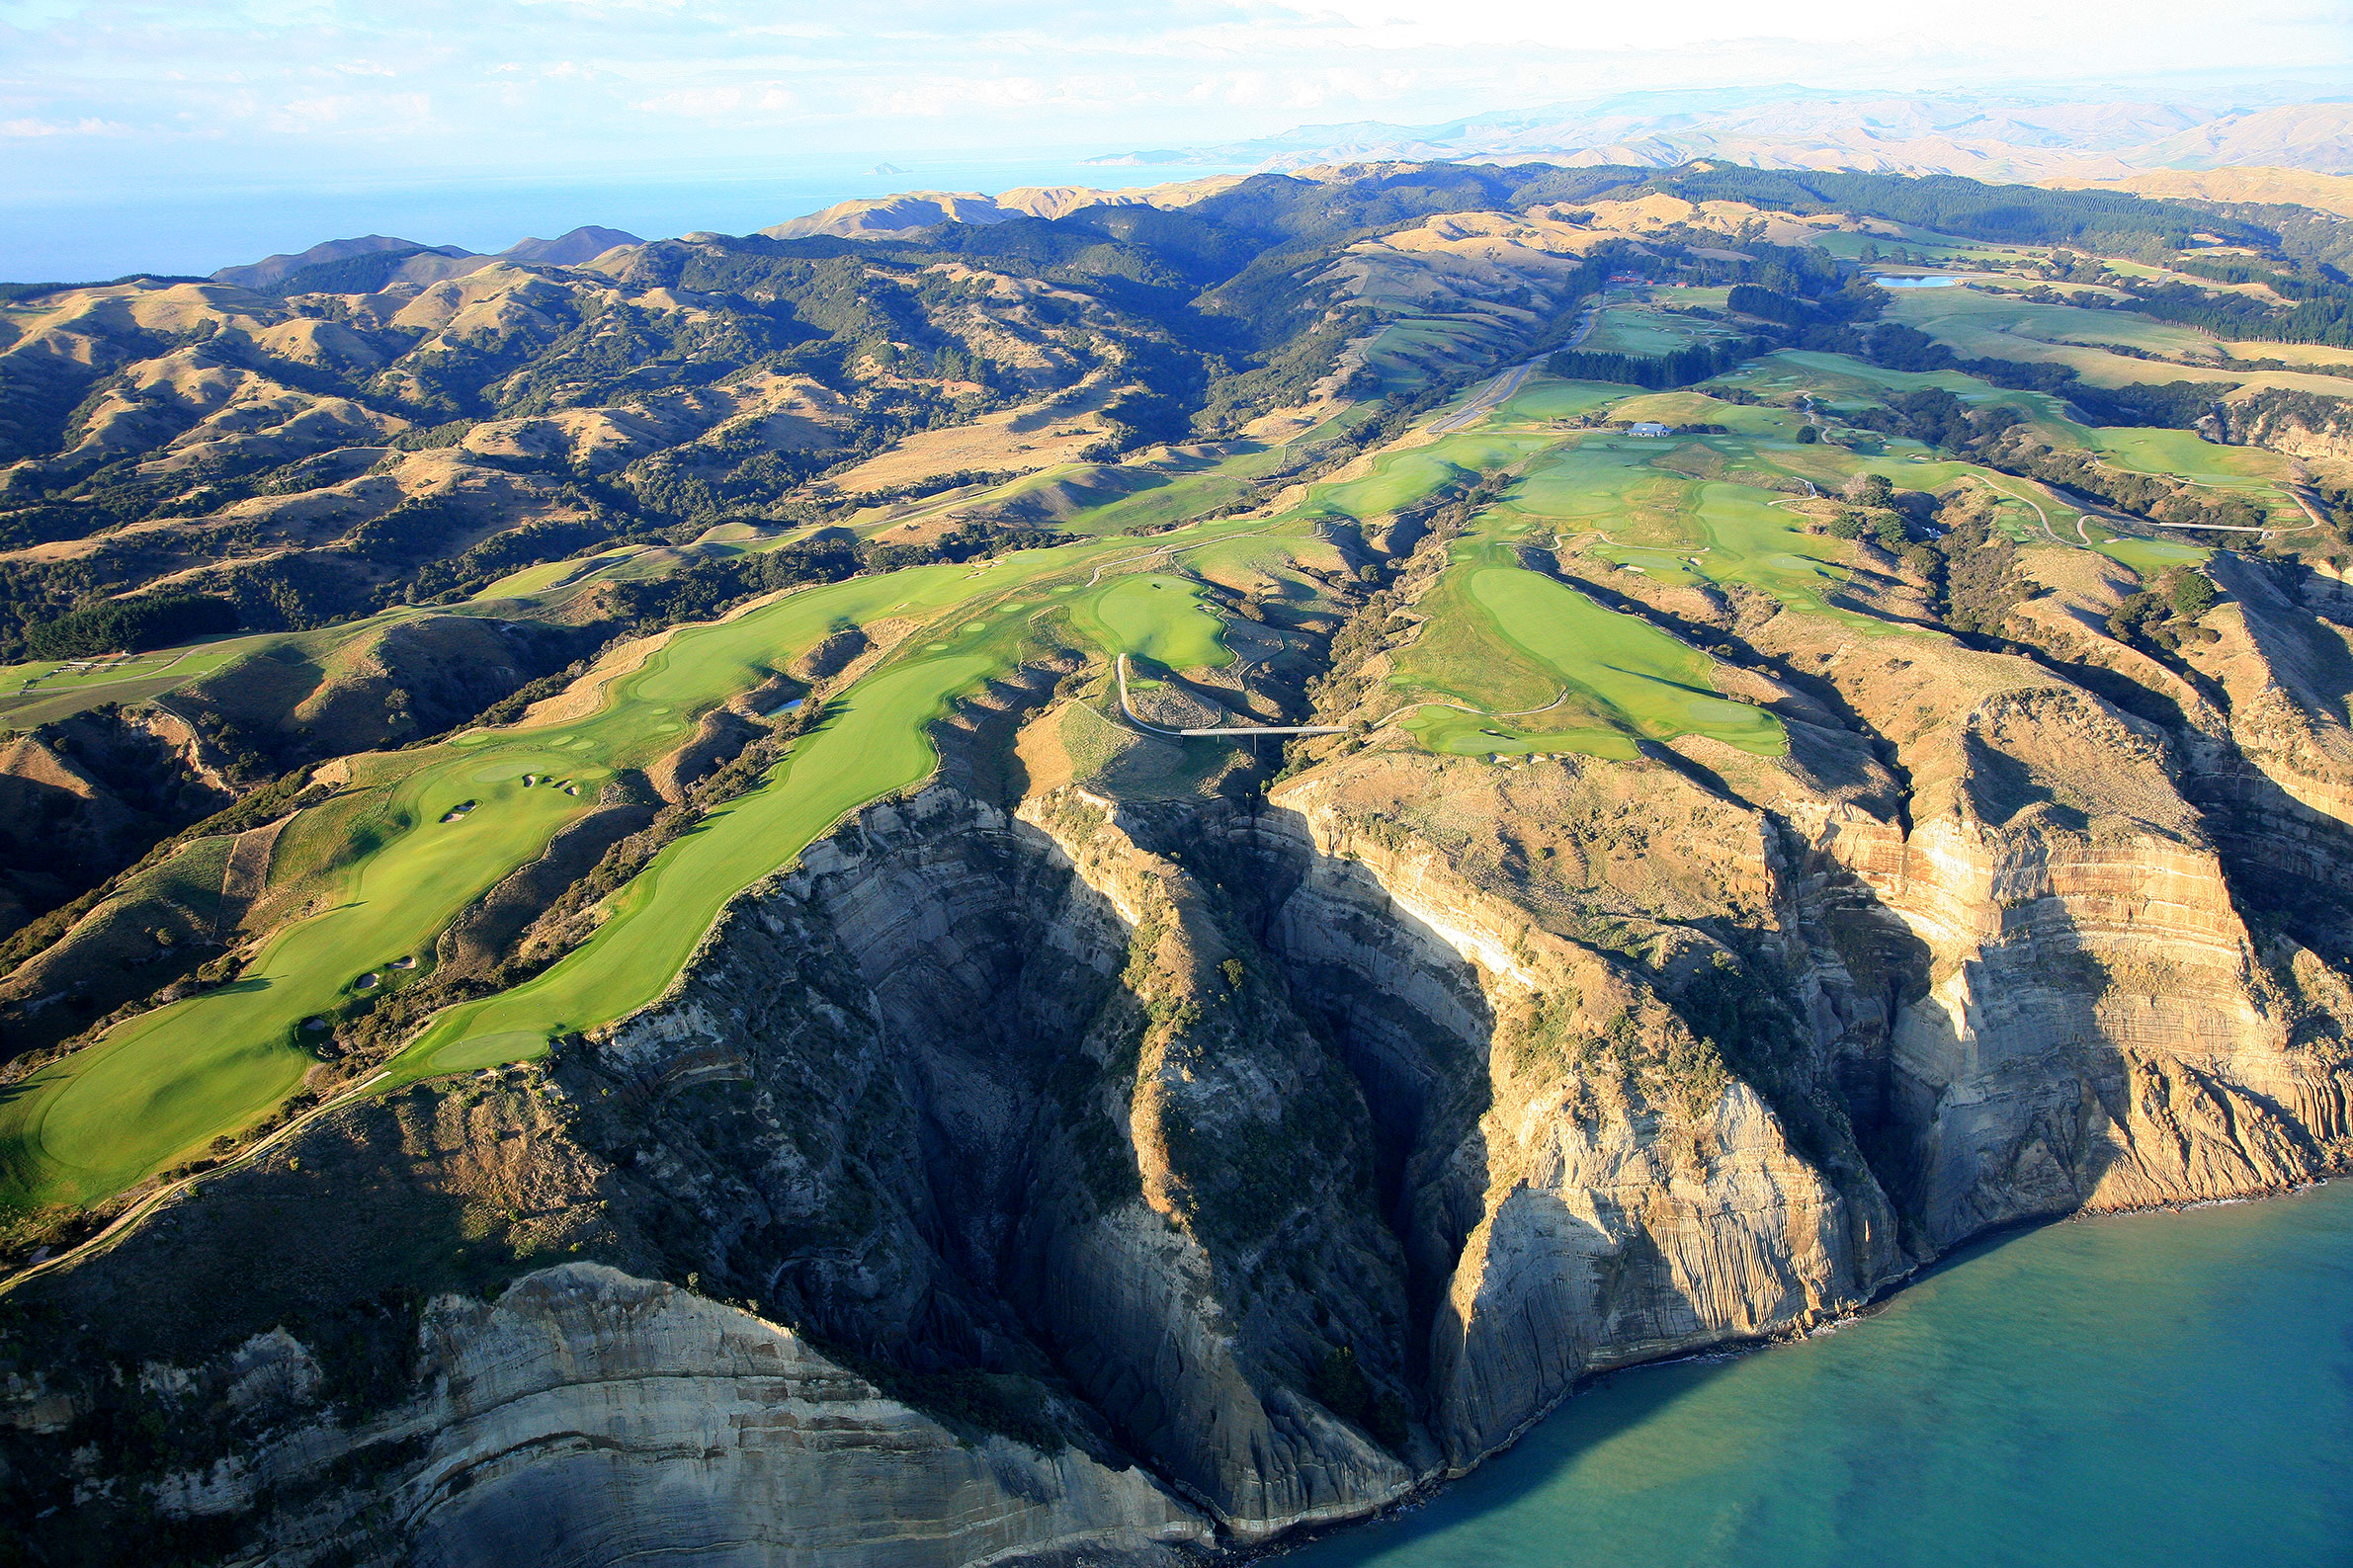 Cape Kidnappers, on the east coast of New Zealand's north island, is one of the most photographed courses in world golf. Here, holes 13 to 16 show the spectacular drop down from the course to Hawke's Bay below. Gary Lisbon